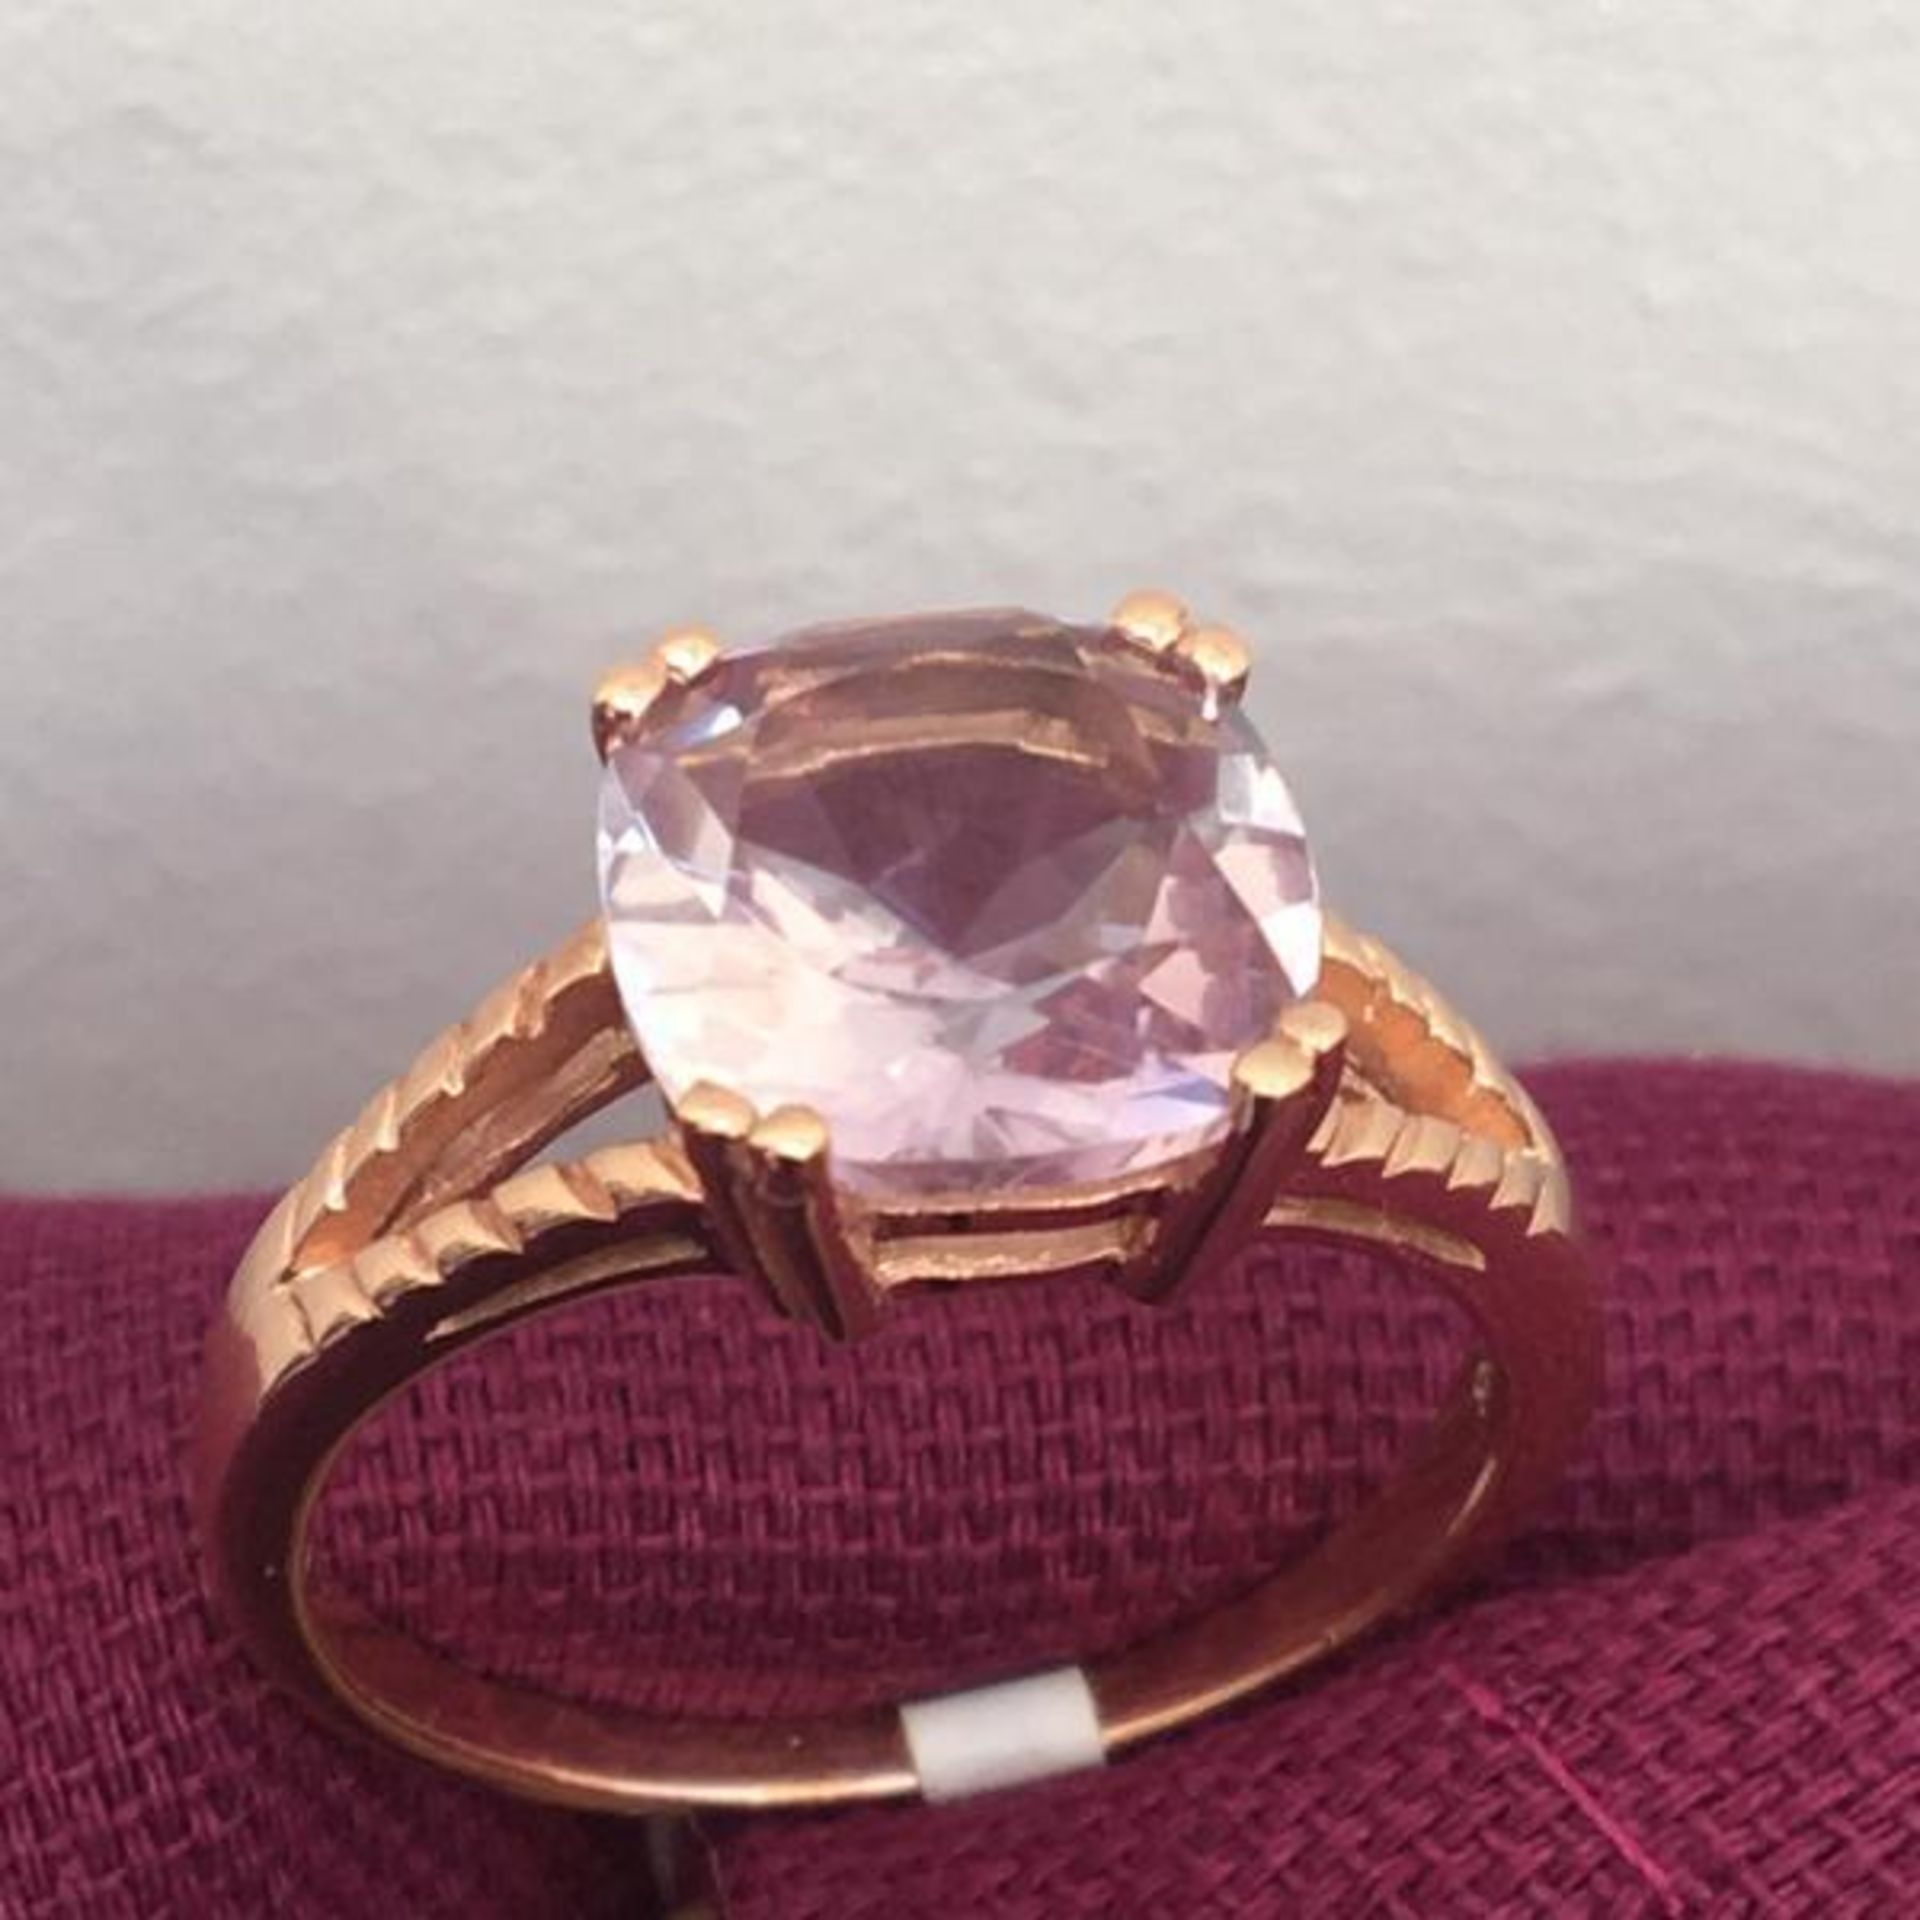 4ct Cushion Cut Rose De France Amethyst Solitaire Ring - Rose Gold Over Sterling Silver. Size R.